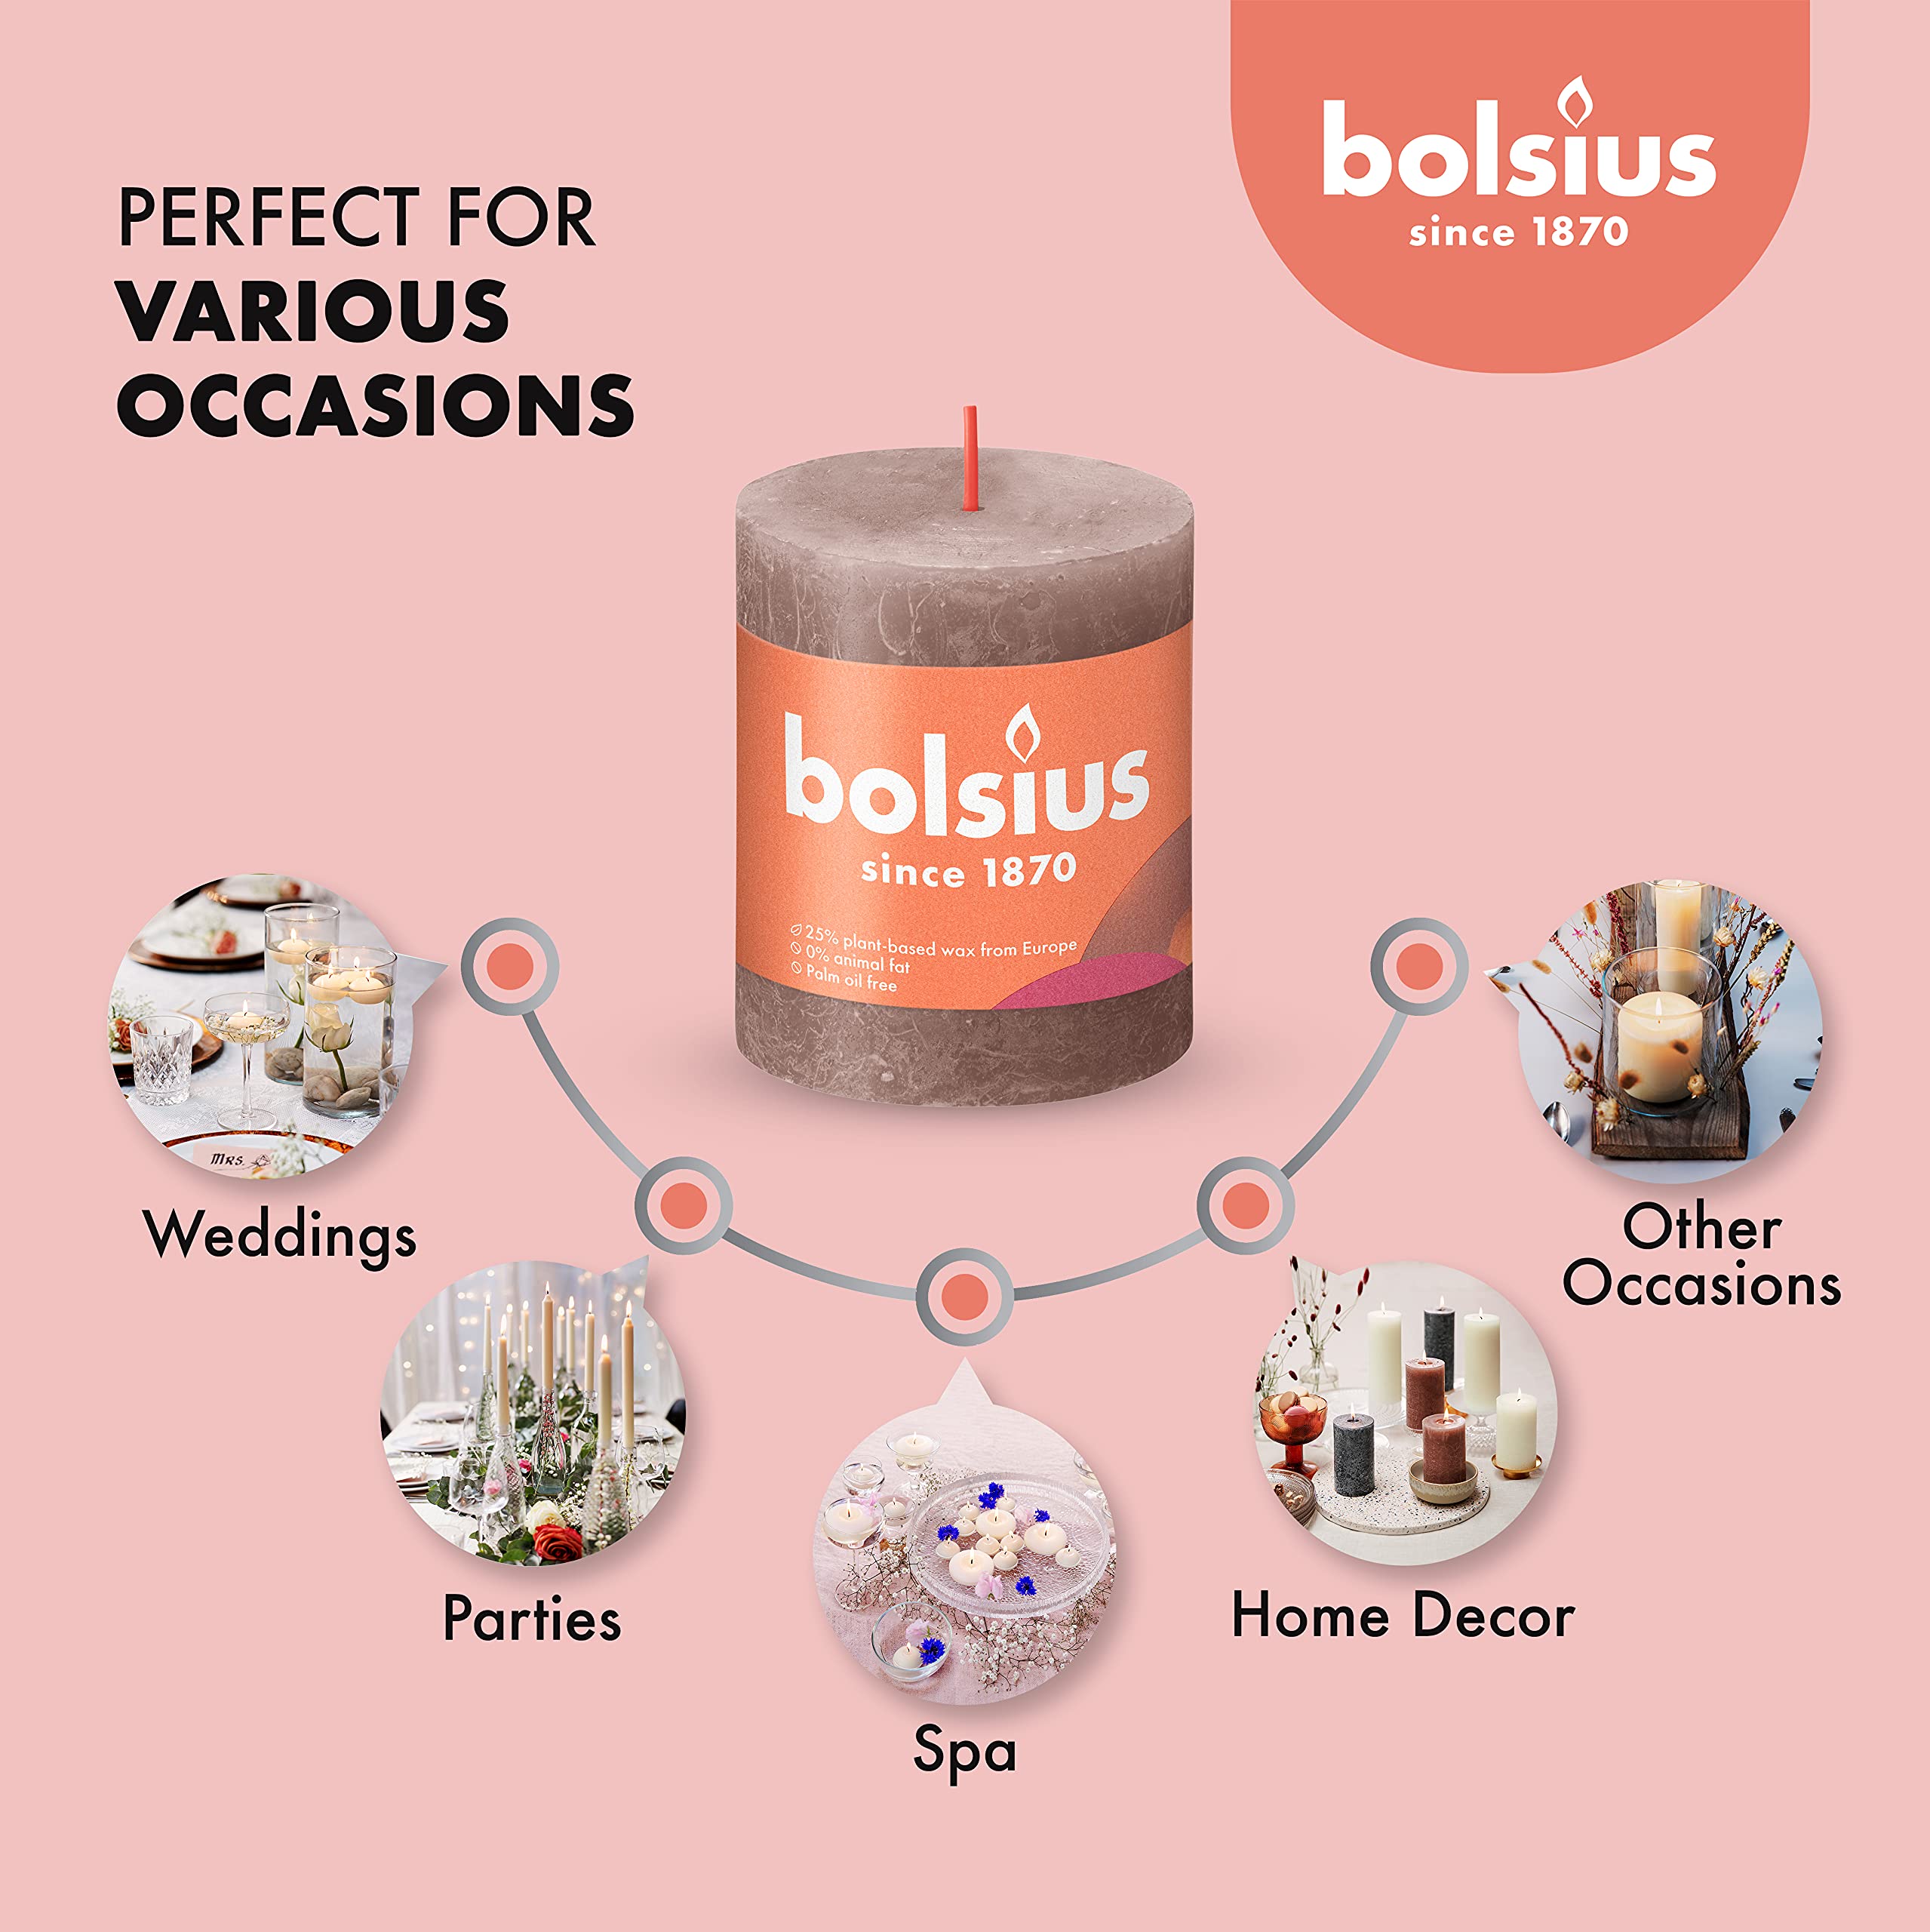 BOLSIUS 4 Pack Taupe Rustic Pillar Candles - 2.75 X 3.25 Inches - Premium European Quality - Includes Natural Plant-Based Wax - Unscented Dripless Smokeless 35 Hour Party and Wedding Candles  - Very Good